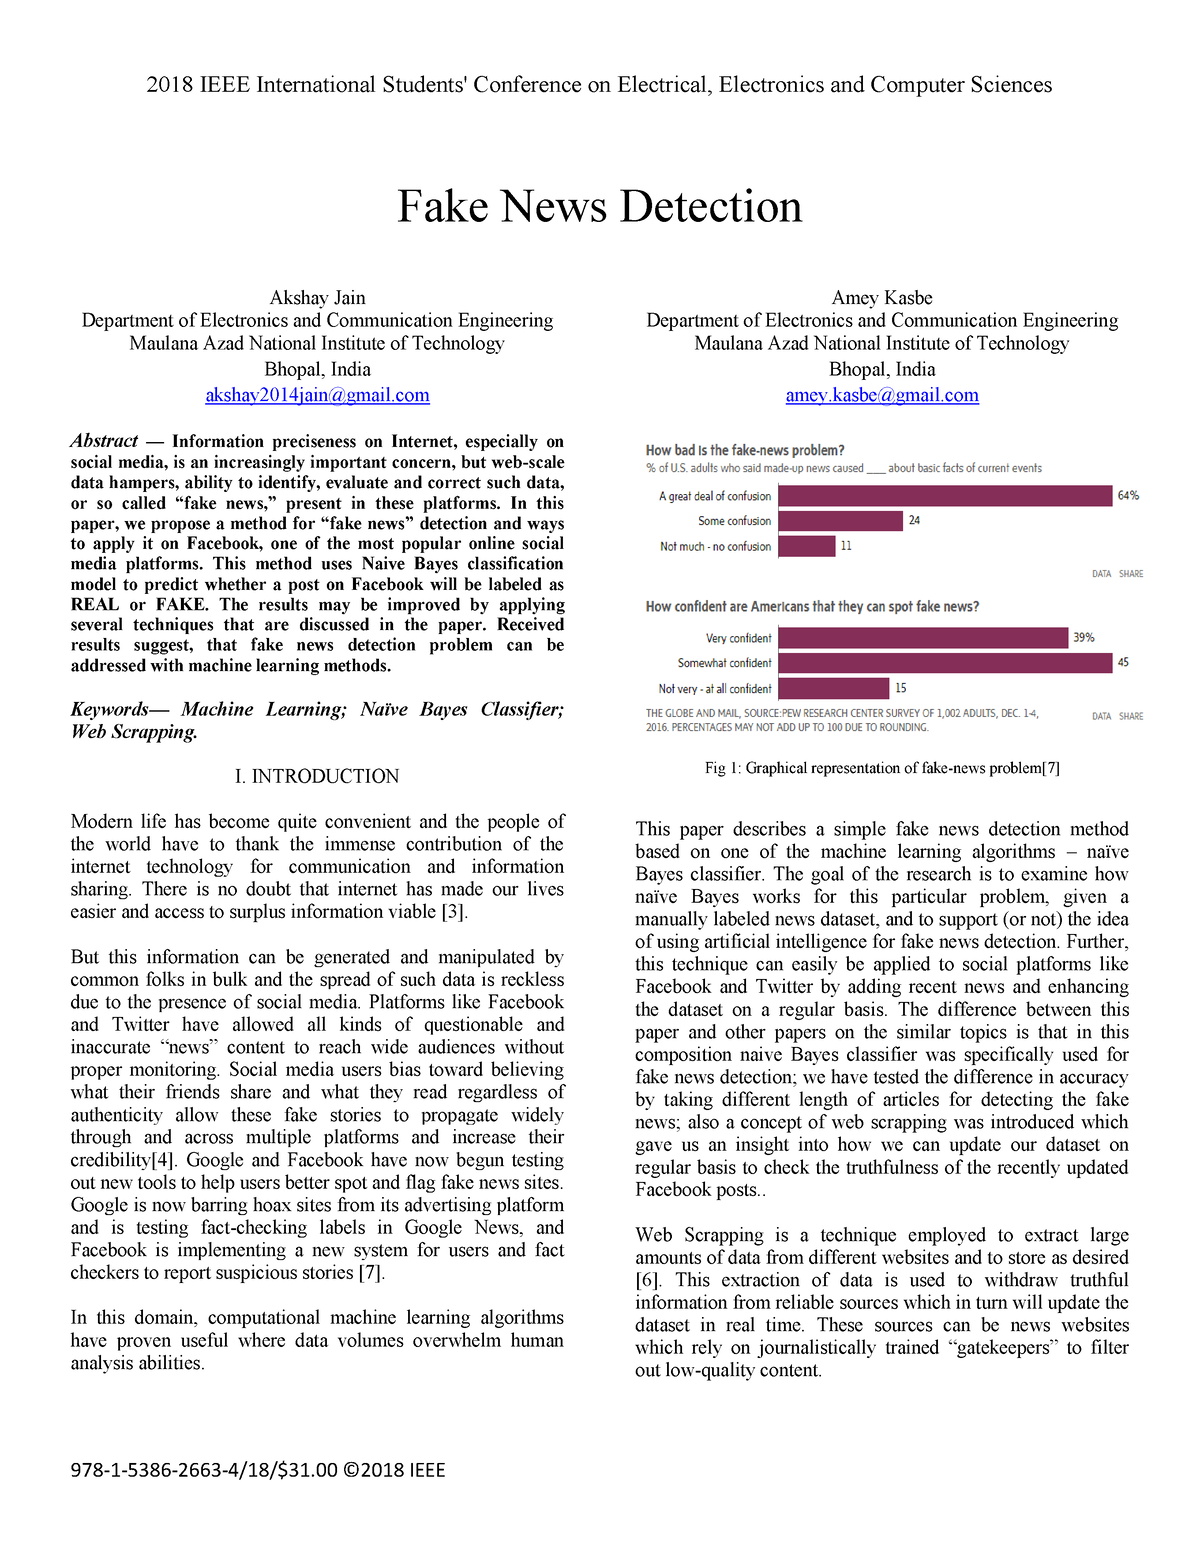 fake news detection research papers ieee